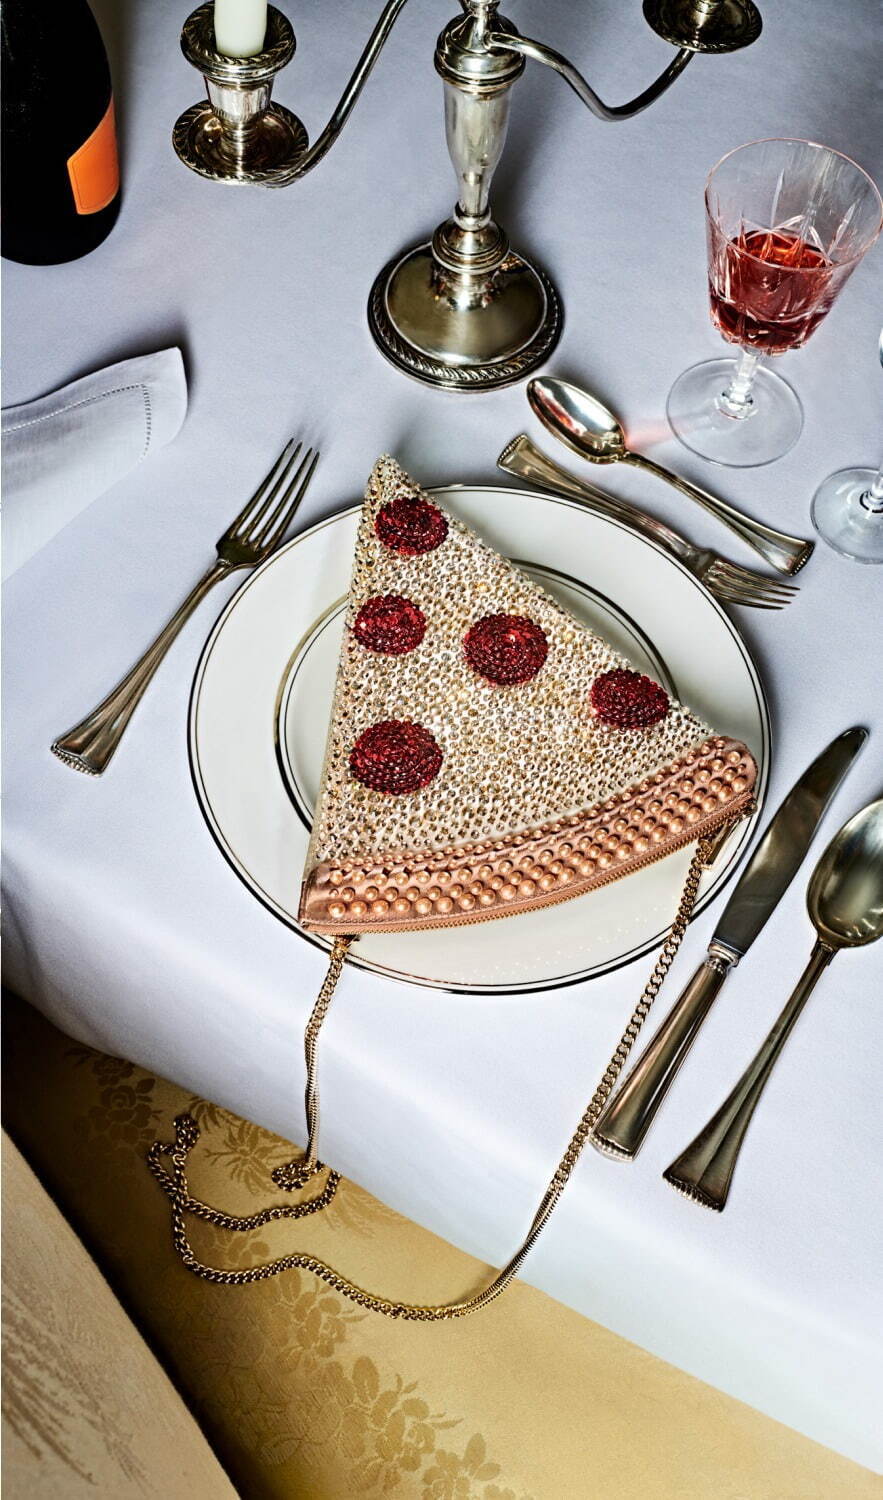 Kate Spade Christmas Collection Has Pizza-Inspired Items Like Card 